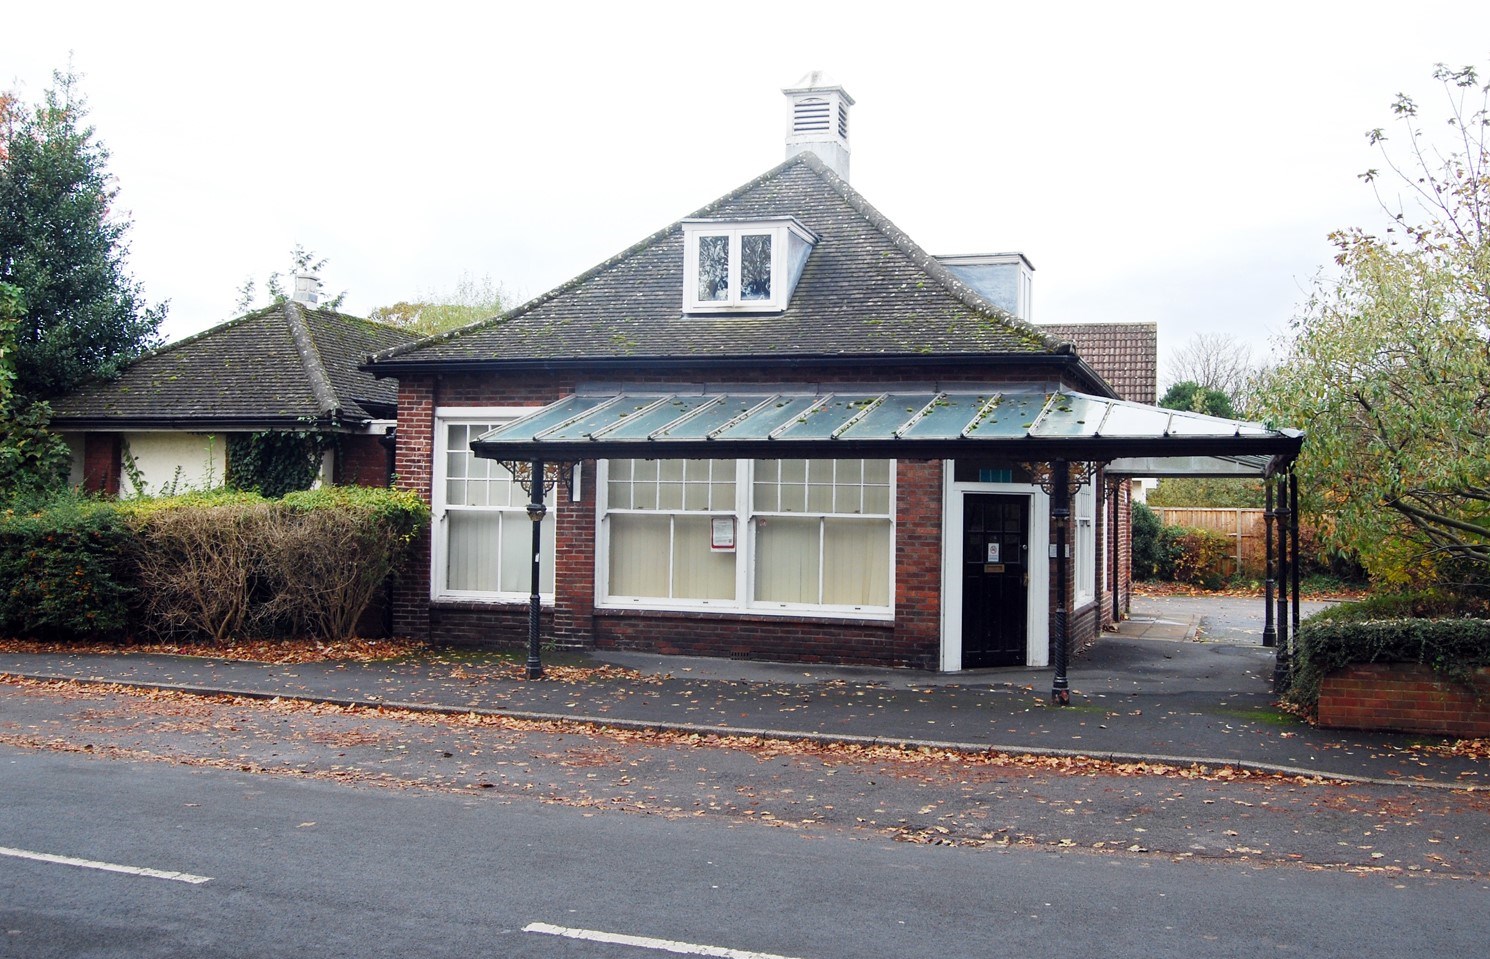 Last chance to have your say on future of Freshfield Surgery